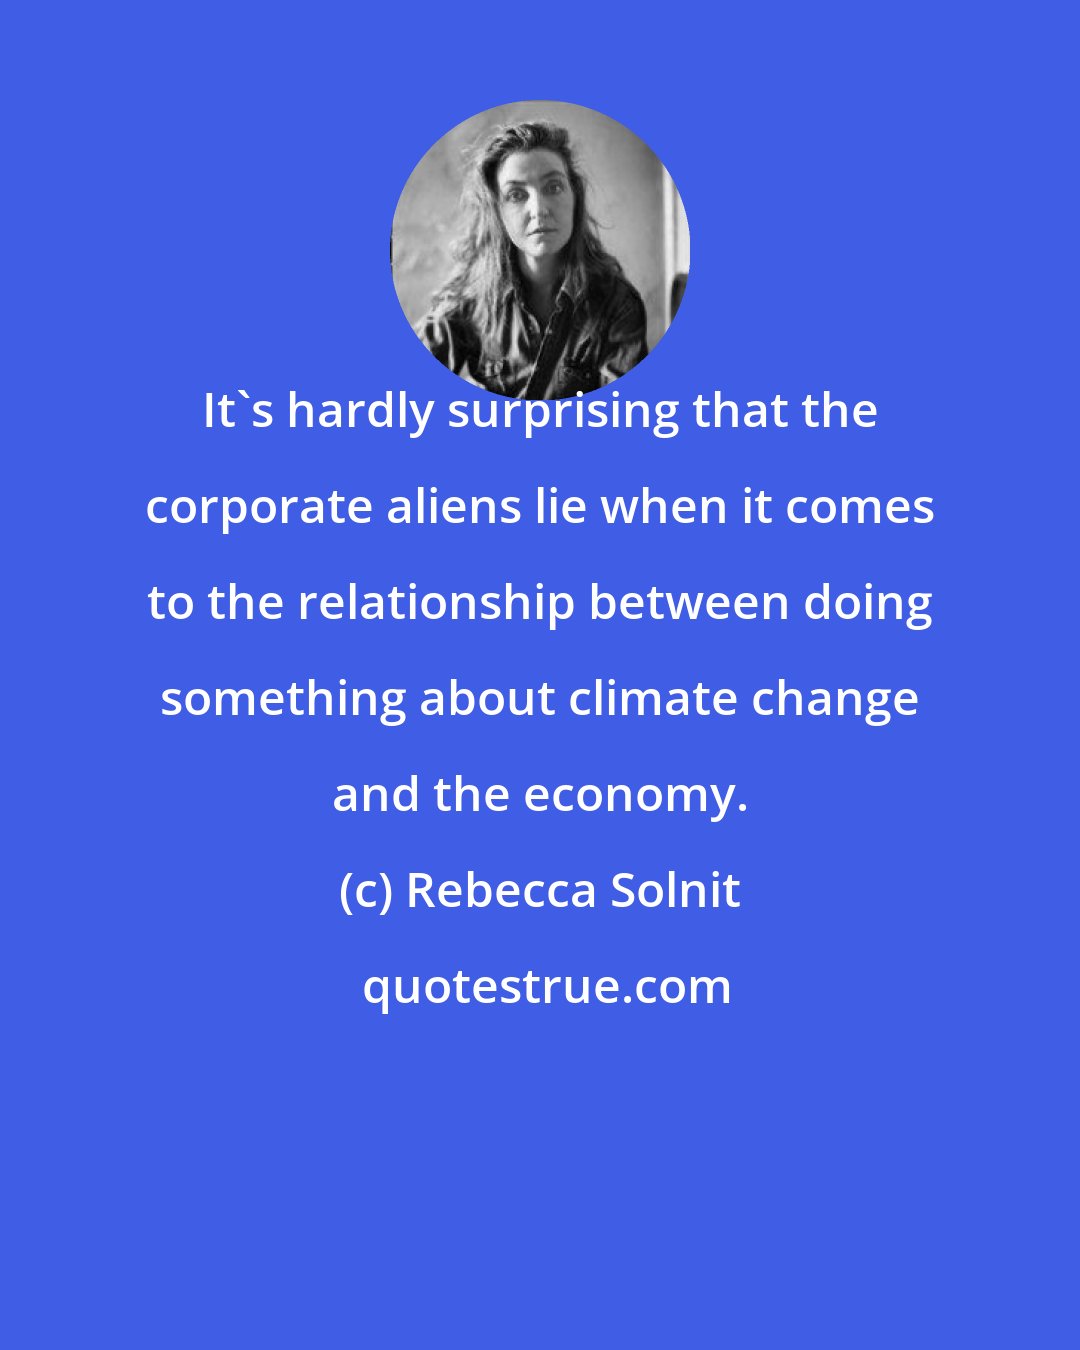 Rebecca Solnit: It's hardly surprising that the corporate aliens lie when it comes to the relationship between doing something about climate change and the economy.